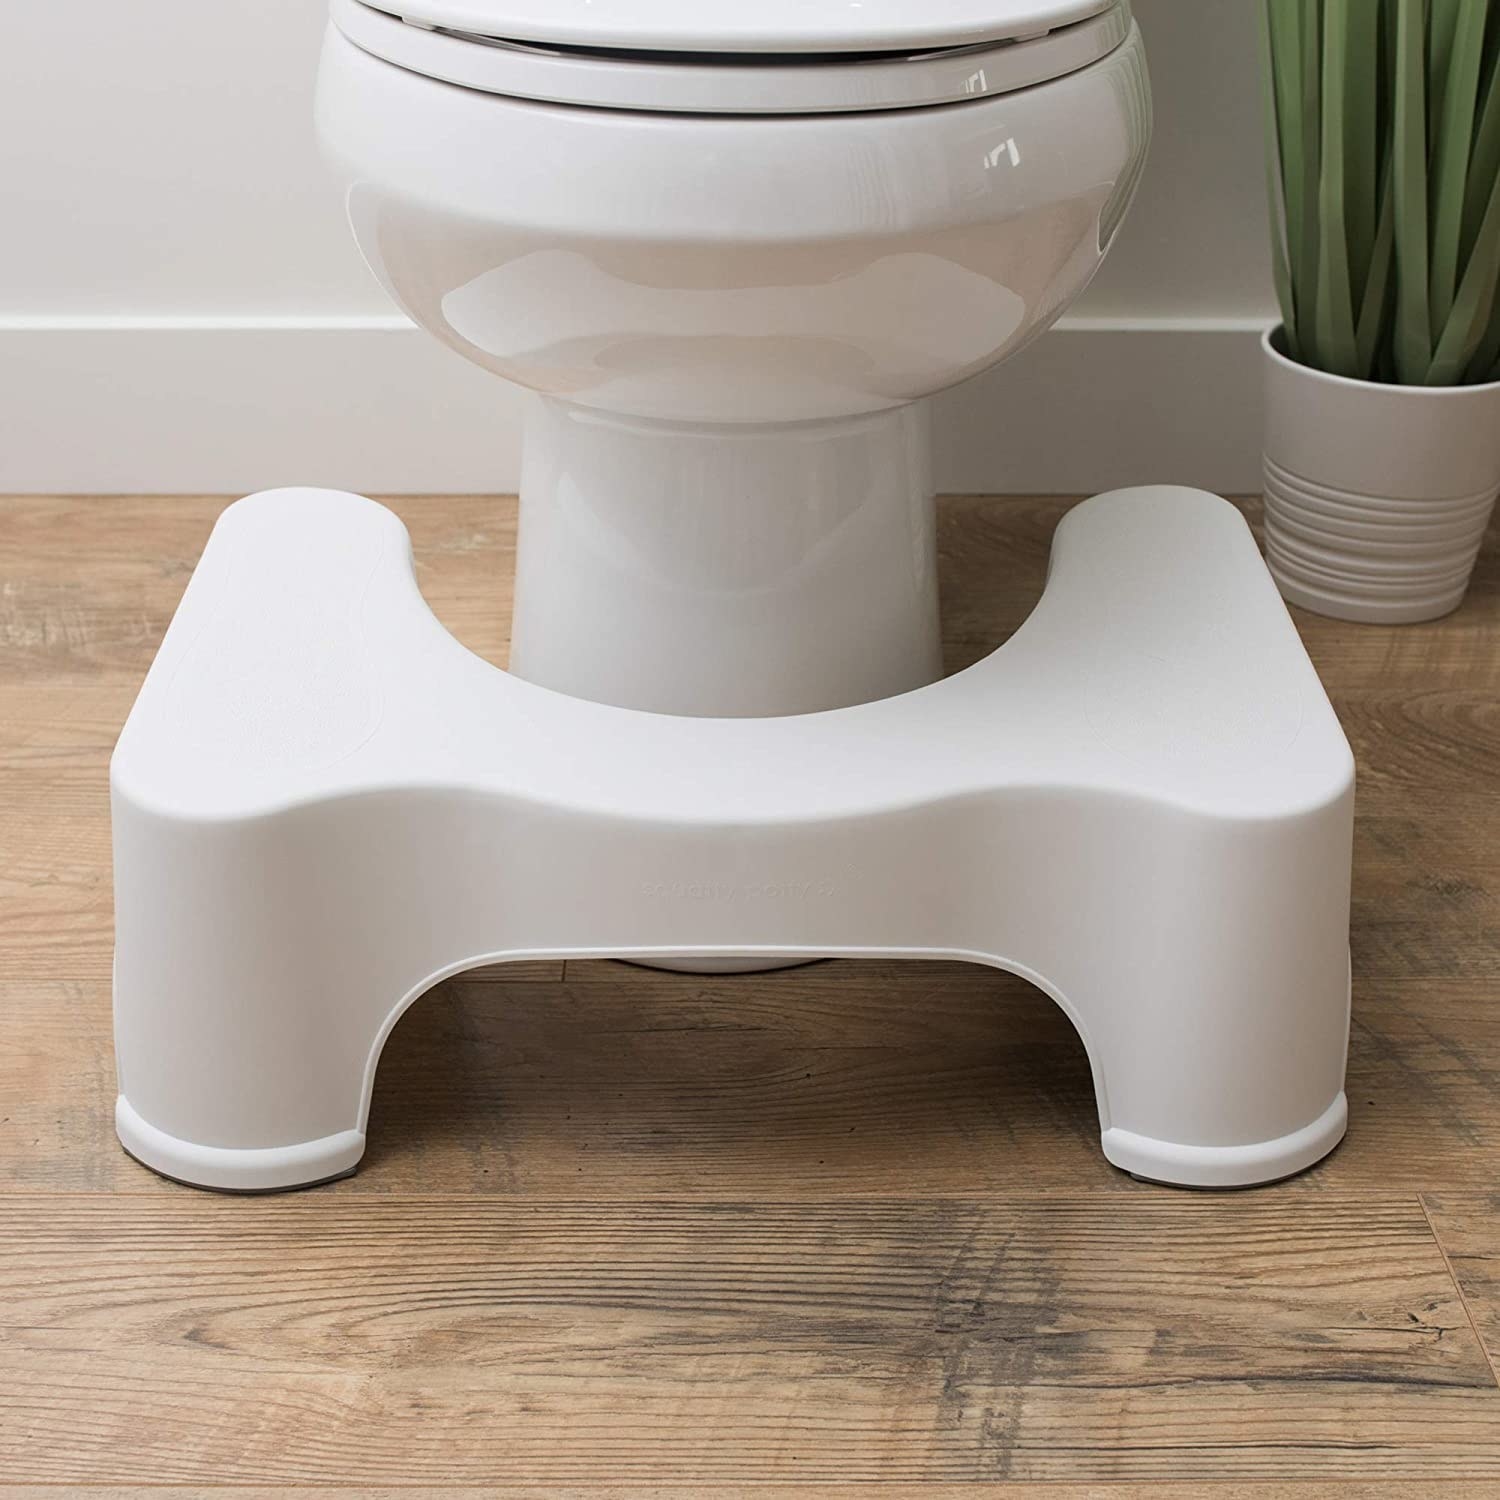 the white squatty potty in front of a toilet 